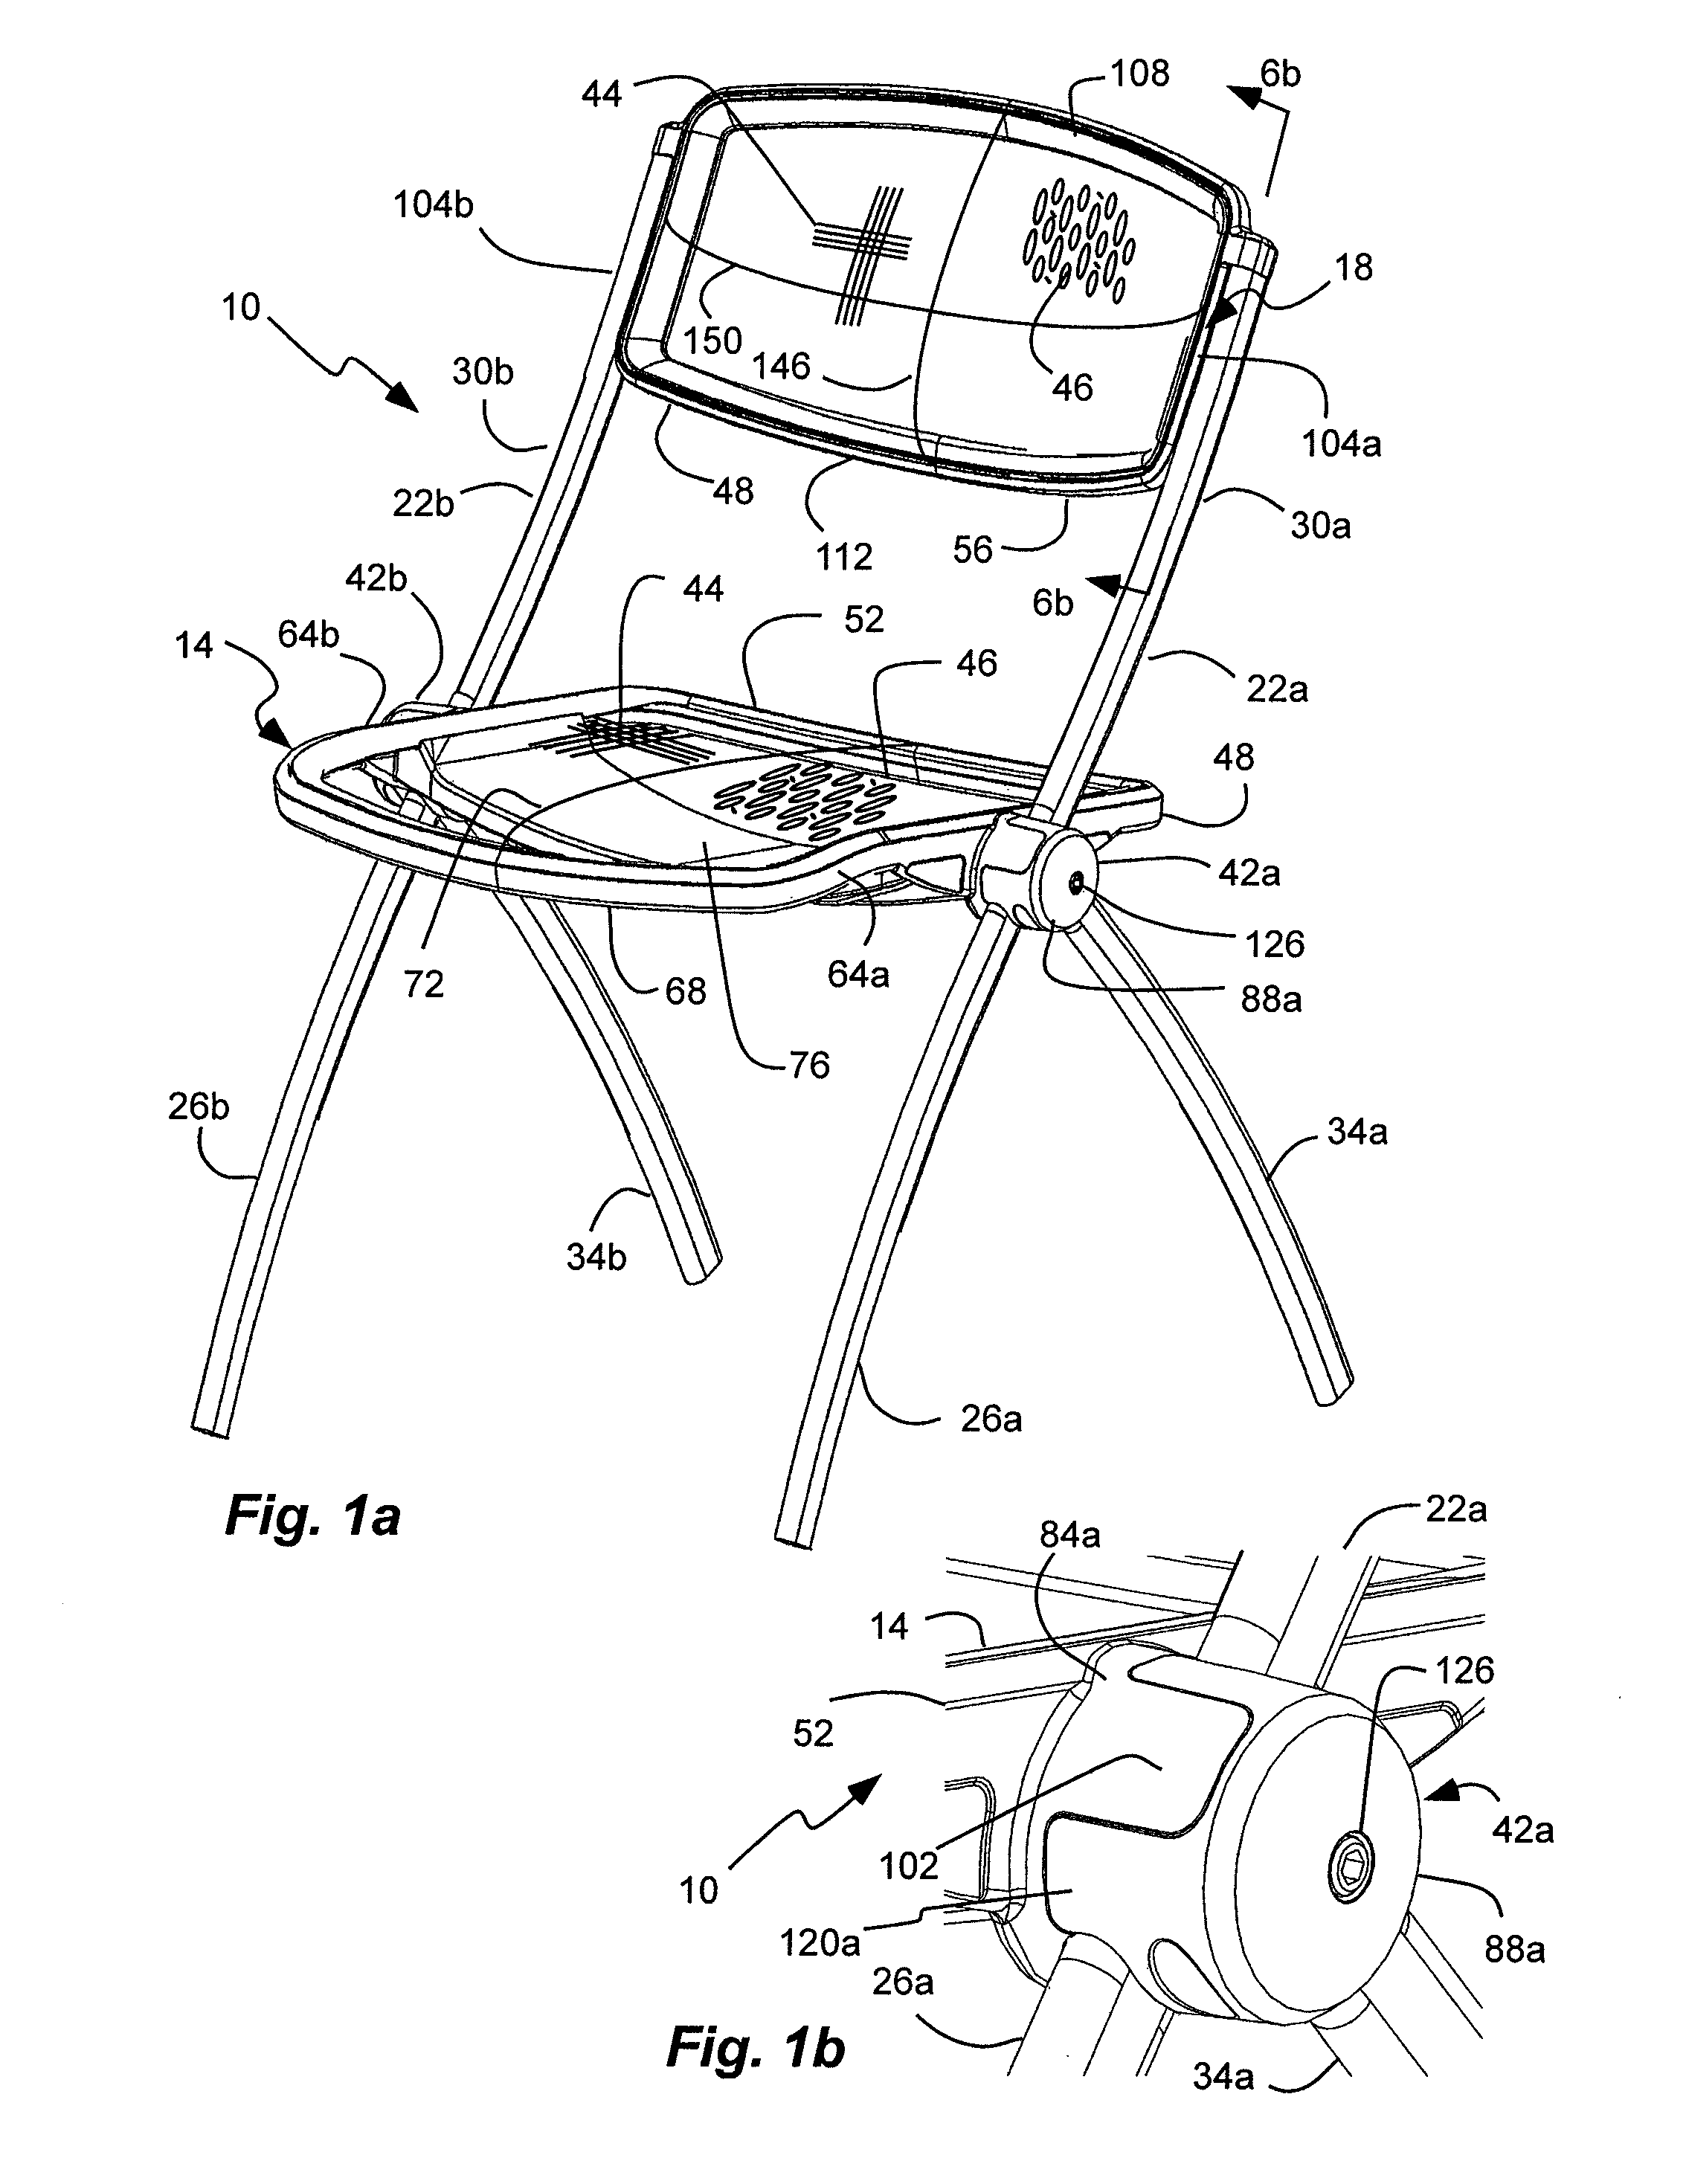 Clamping joint for a chair